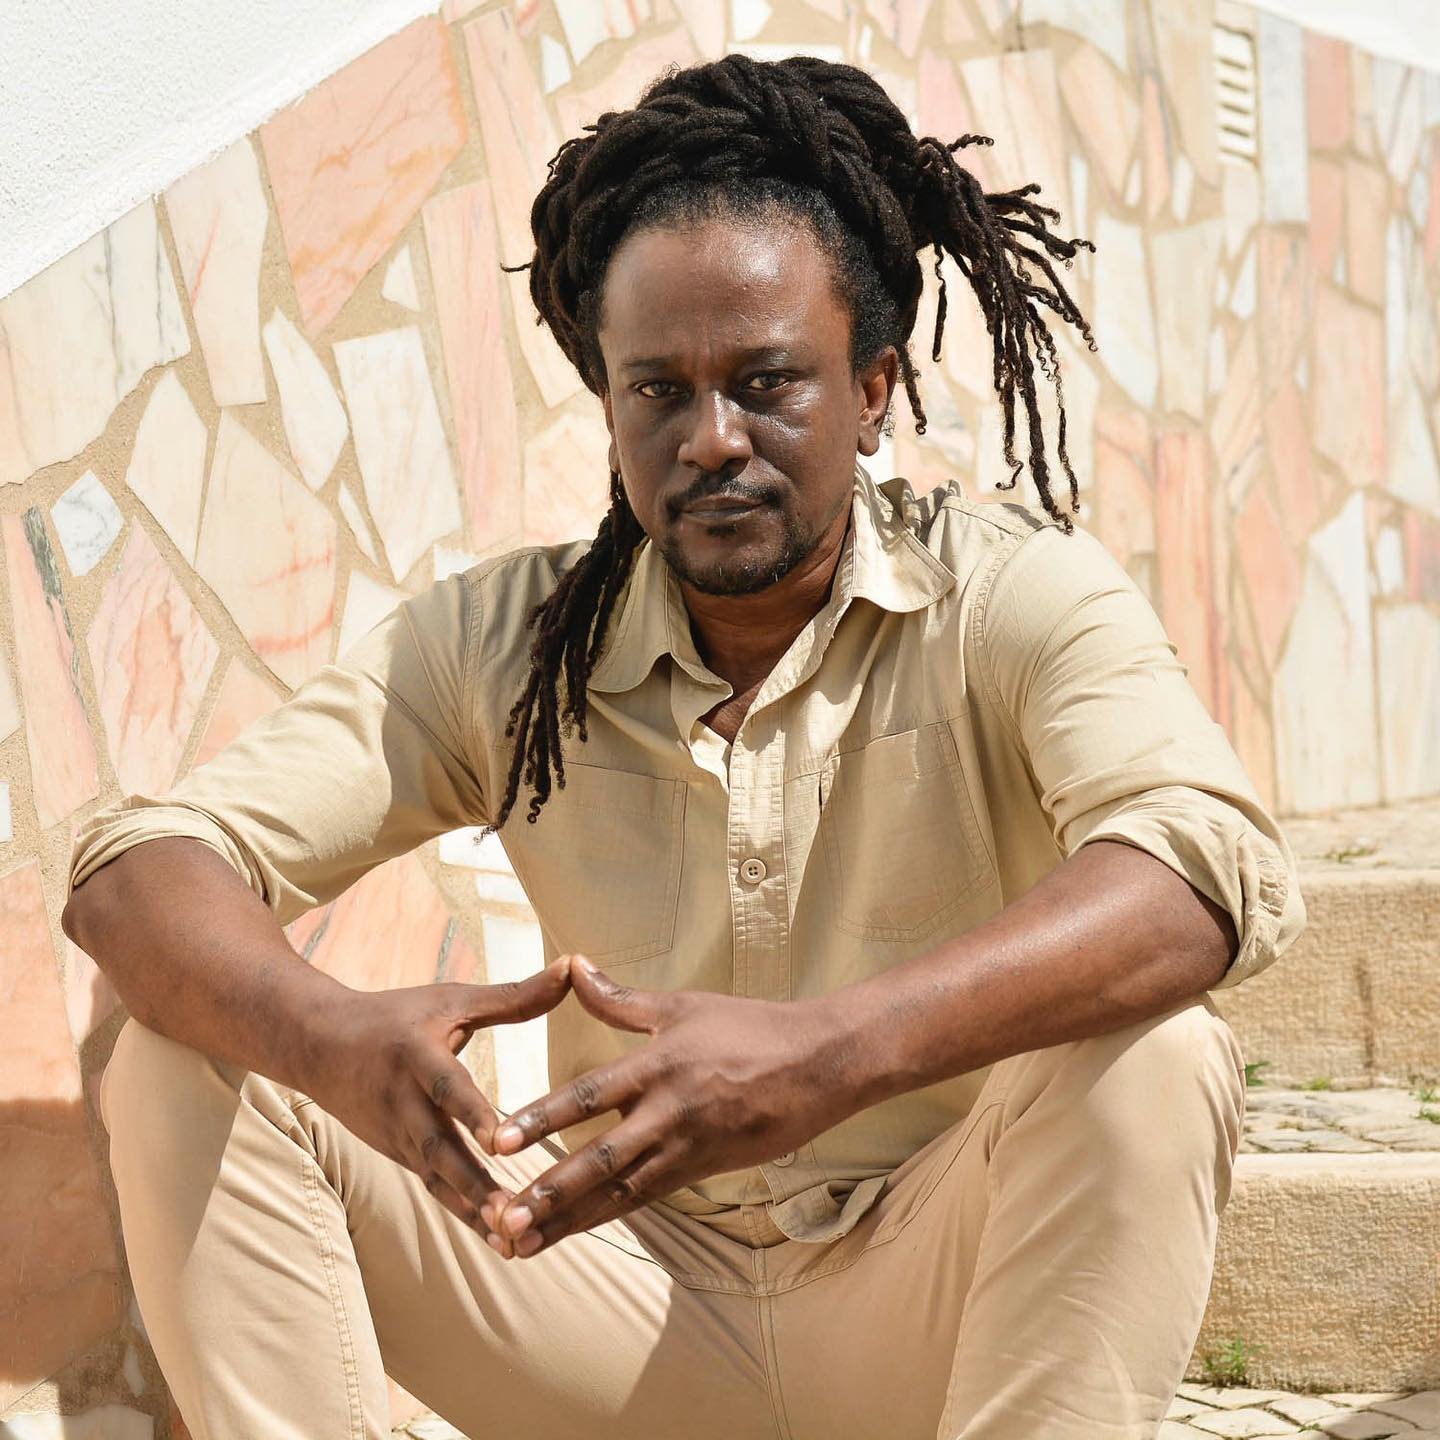 &lsquo;Mr. Liar&rsquo; by Tende Kasha - Catchy Reggae With Origins in Angola, Portugal, and Australia

There&rsquo;s something about candid, straightforward honesty in lyrics that can cut deeper than overly abstract metaphors and symoblism and &ldquo